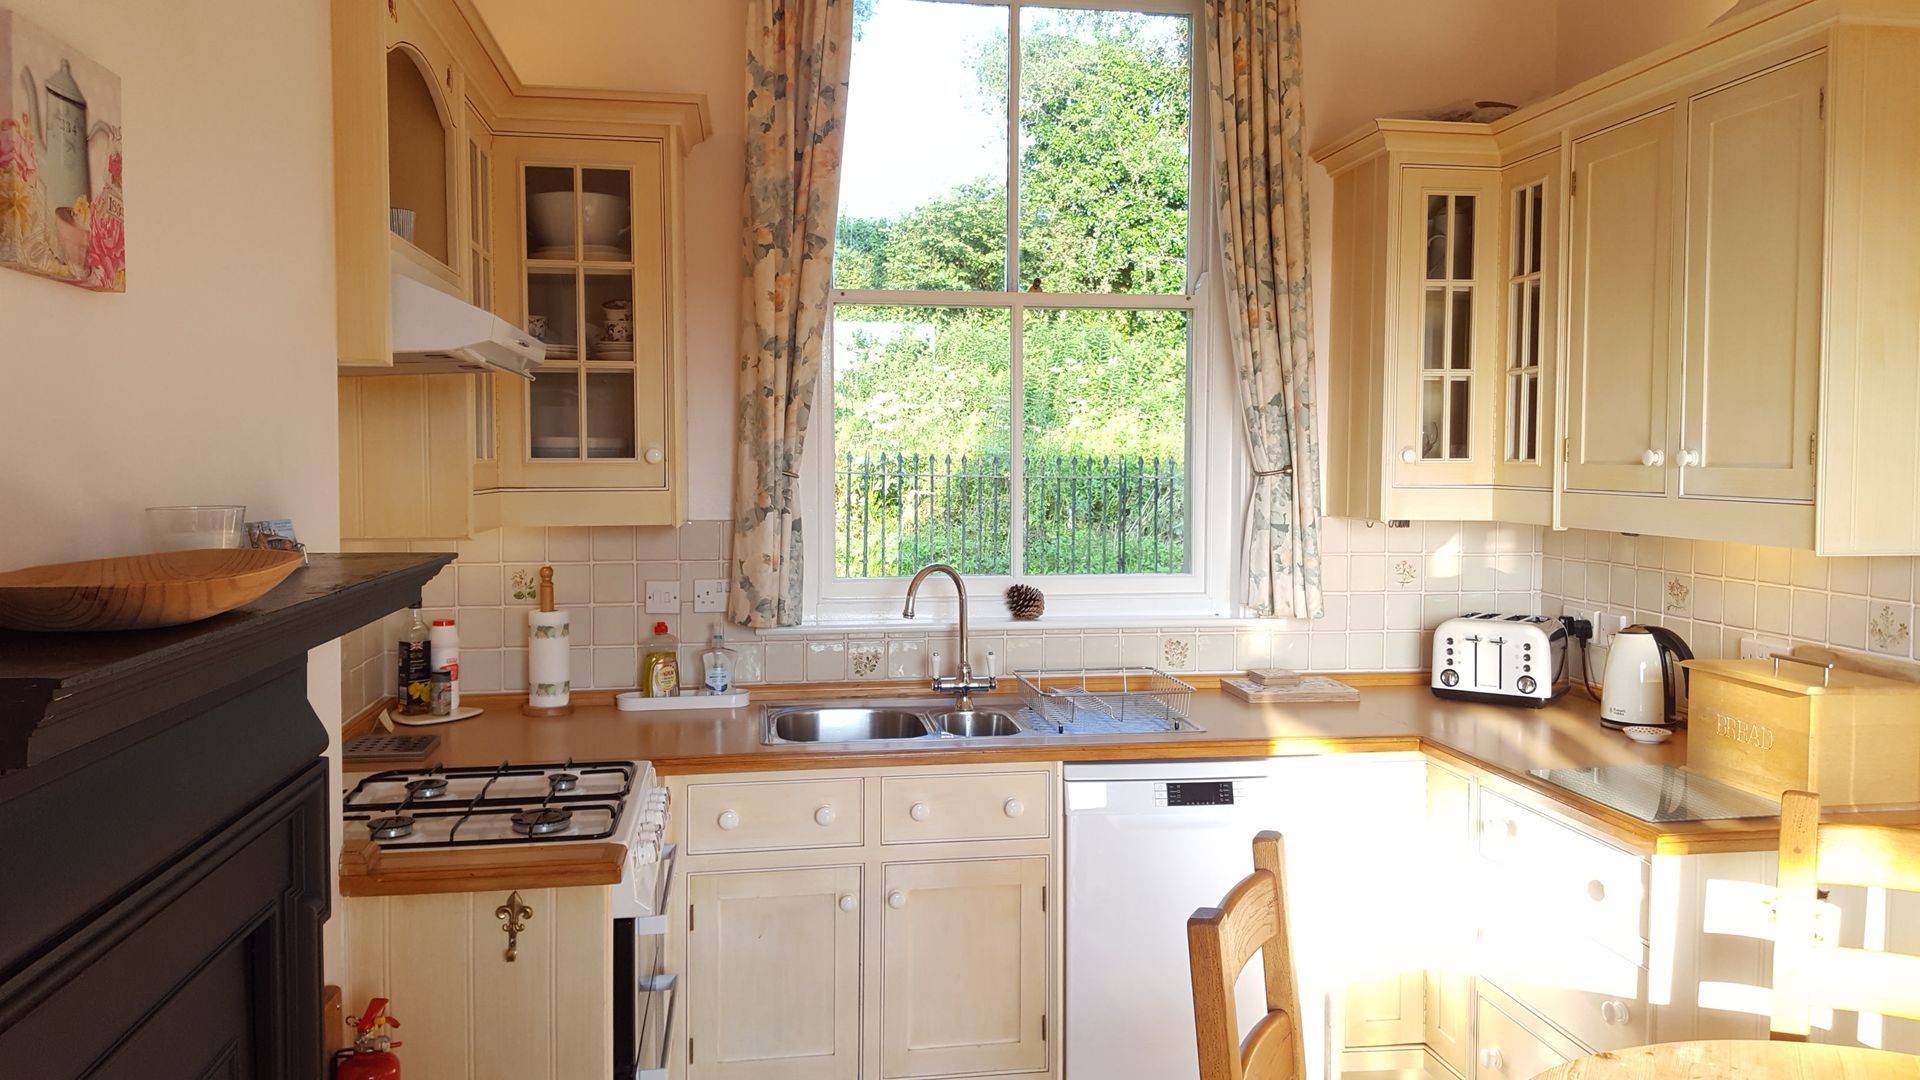 The Smallbone of Devizes fully-fitted country kitchen is in-keeping with the character of the Victorian building